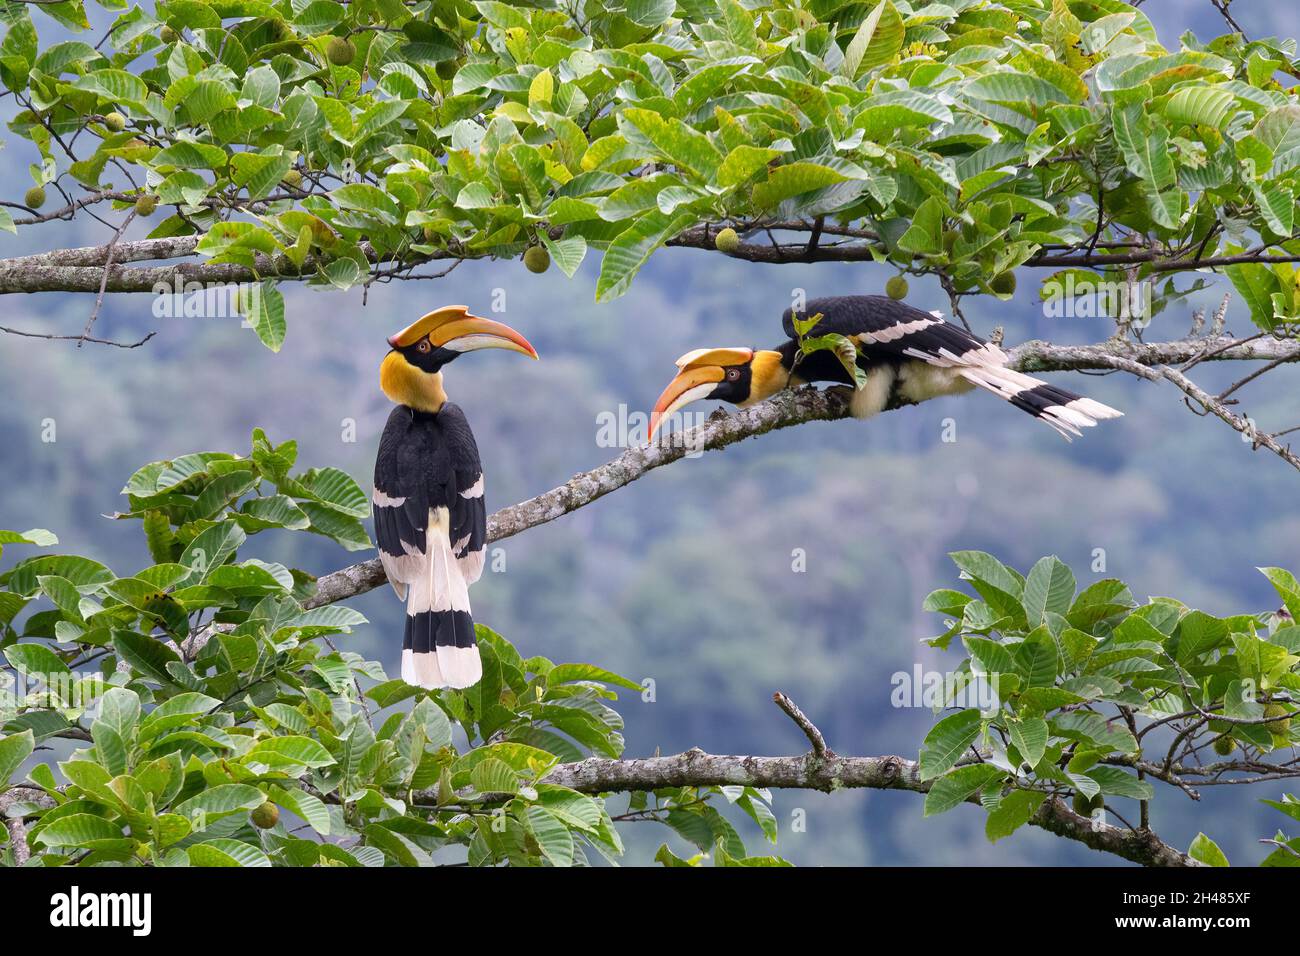 The Great hornbill (Buceros bicornis) also known as the concave-casqued hornbill, great Indian hornbill or great pied hornbill. Stock Photo